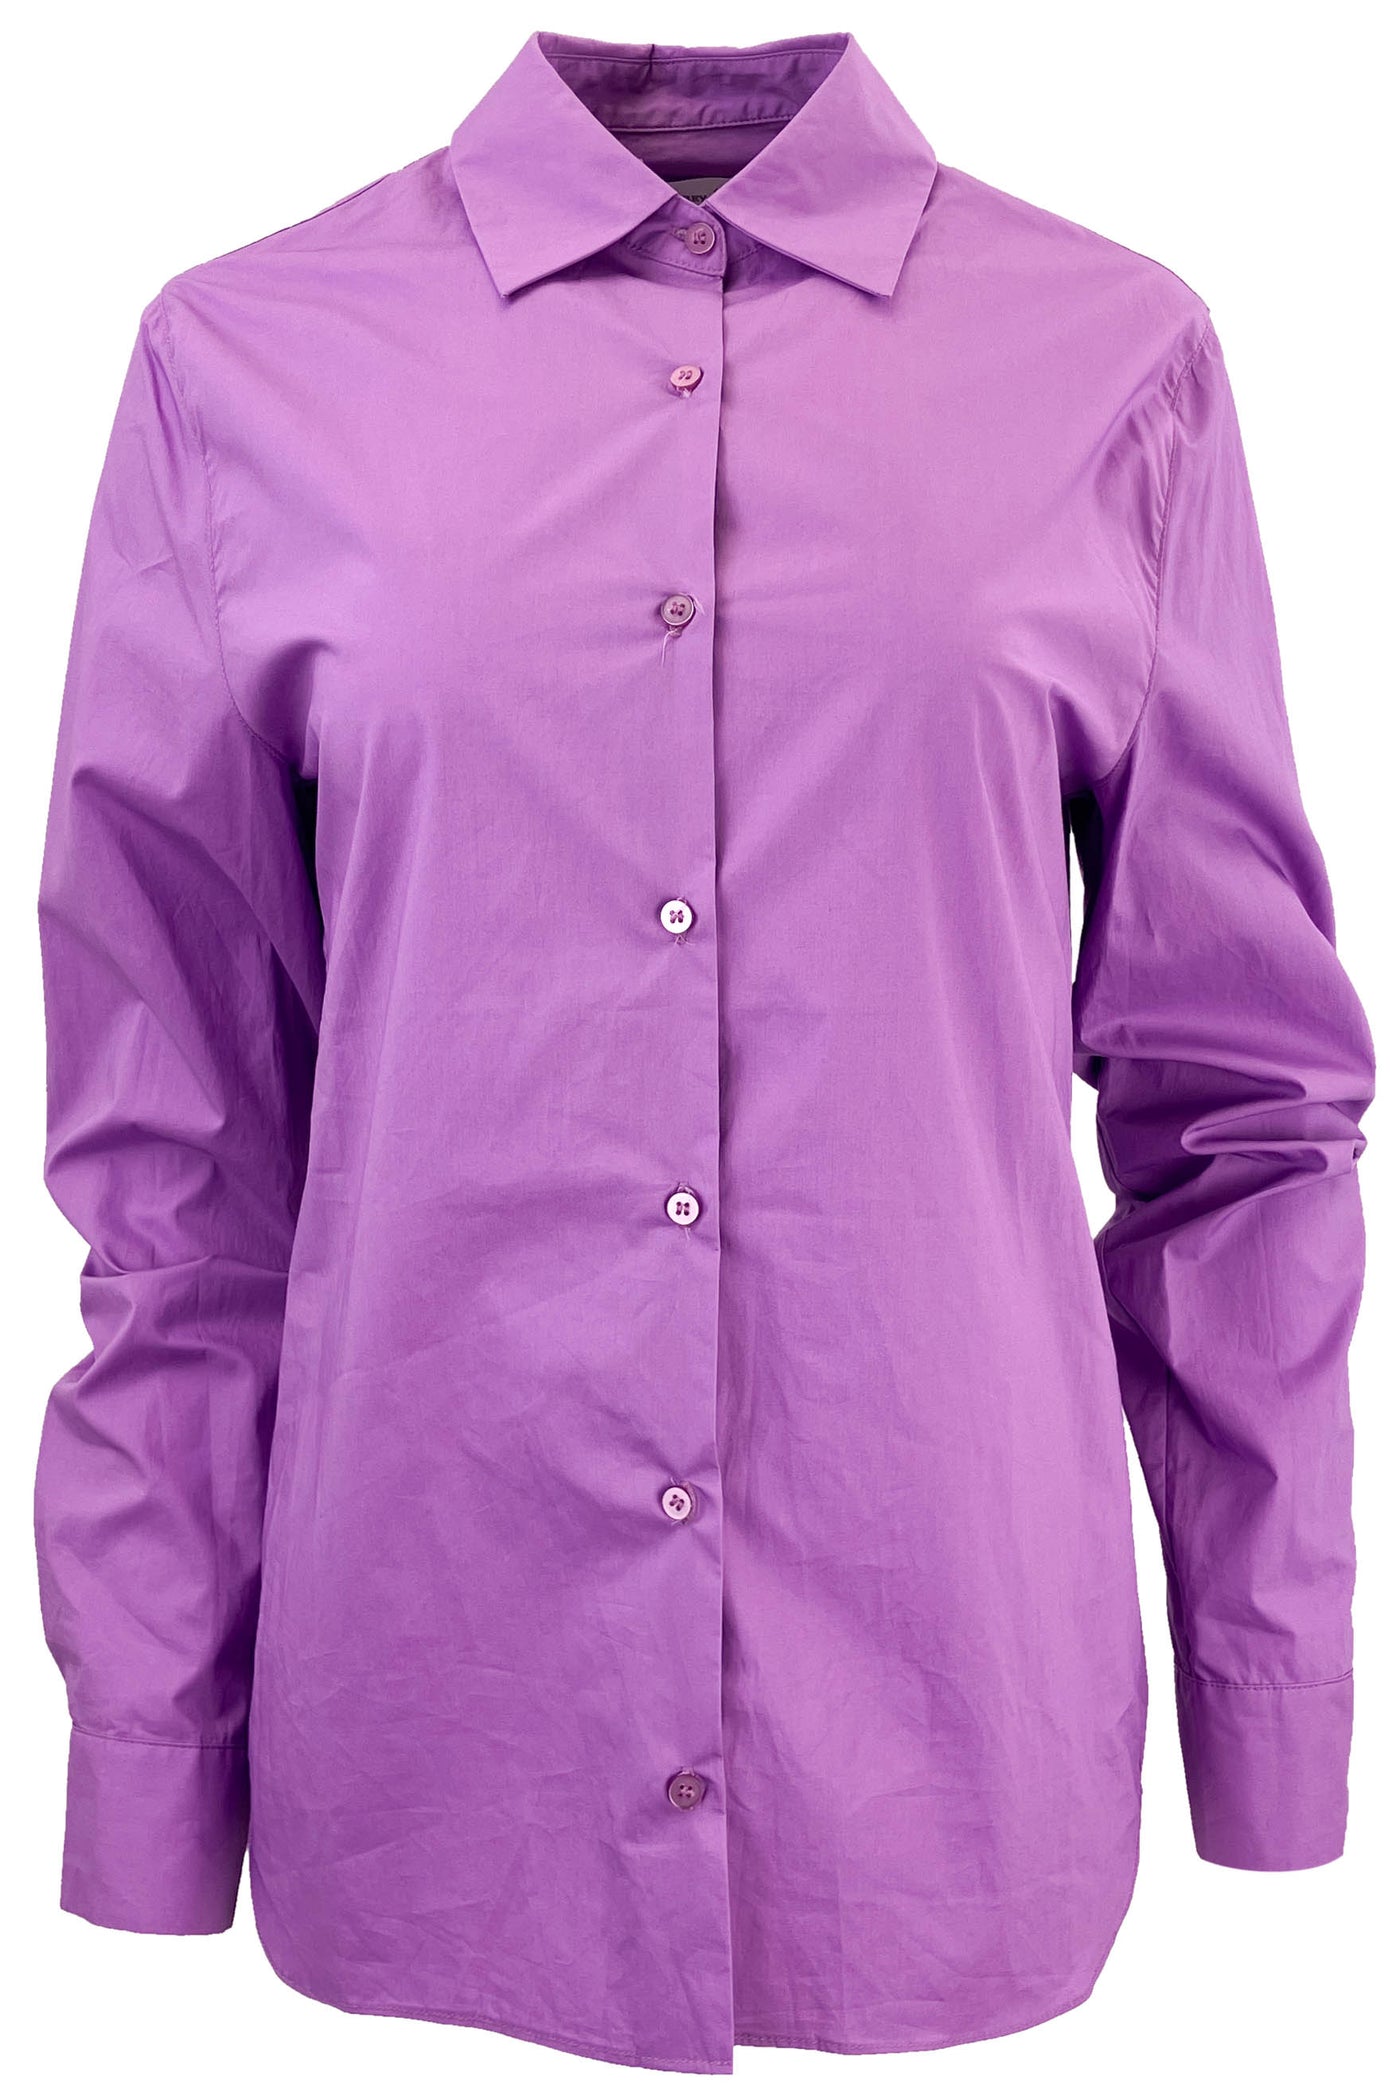 Grey/Ven The Reiki Boyfriend Button Down Shirt in Violet - Discounts on Grey/Ven at UAL